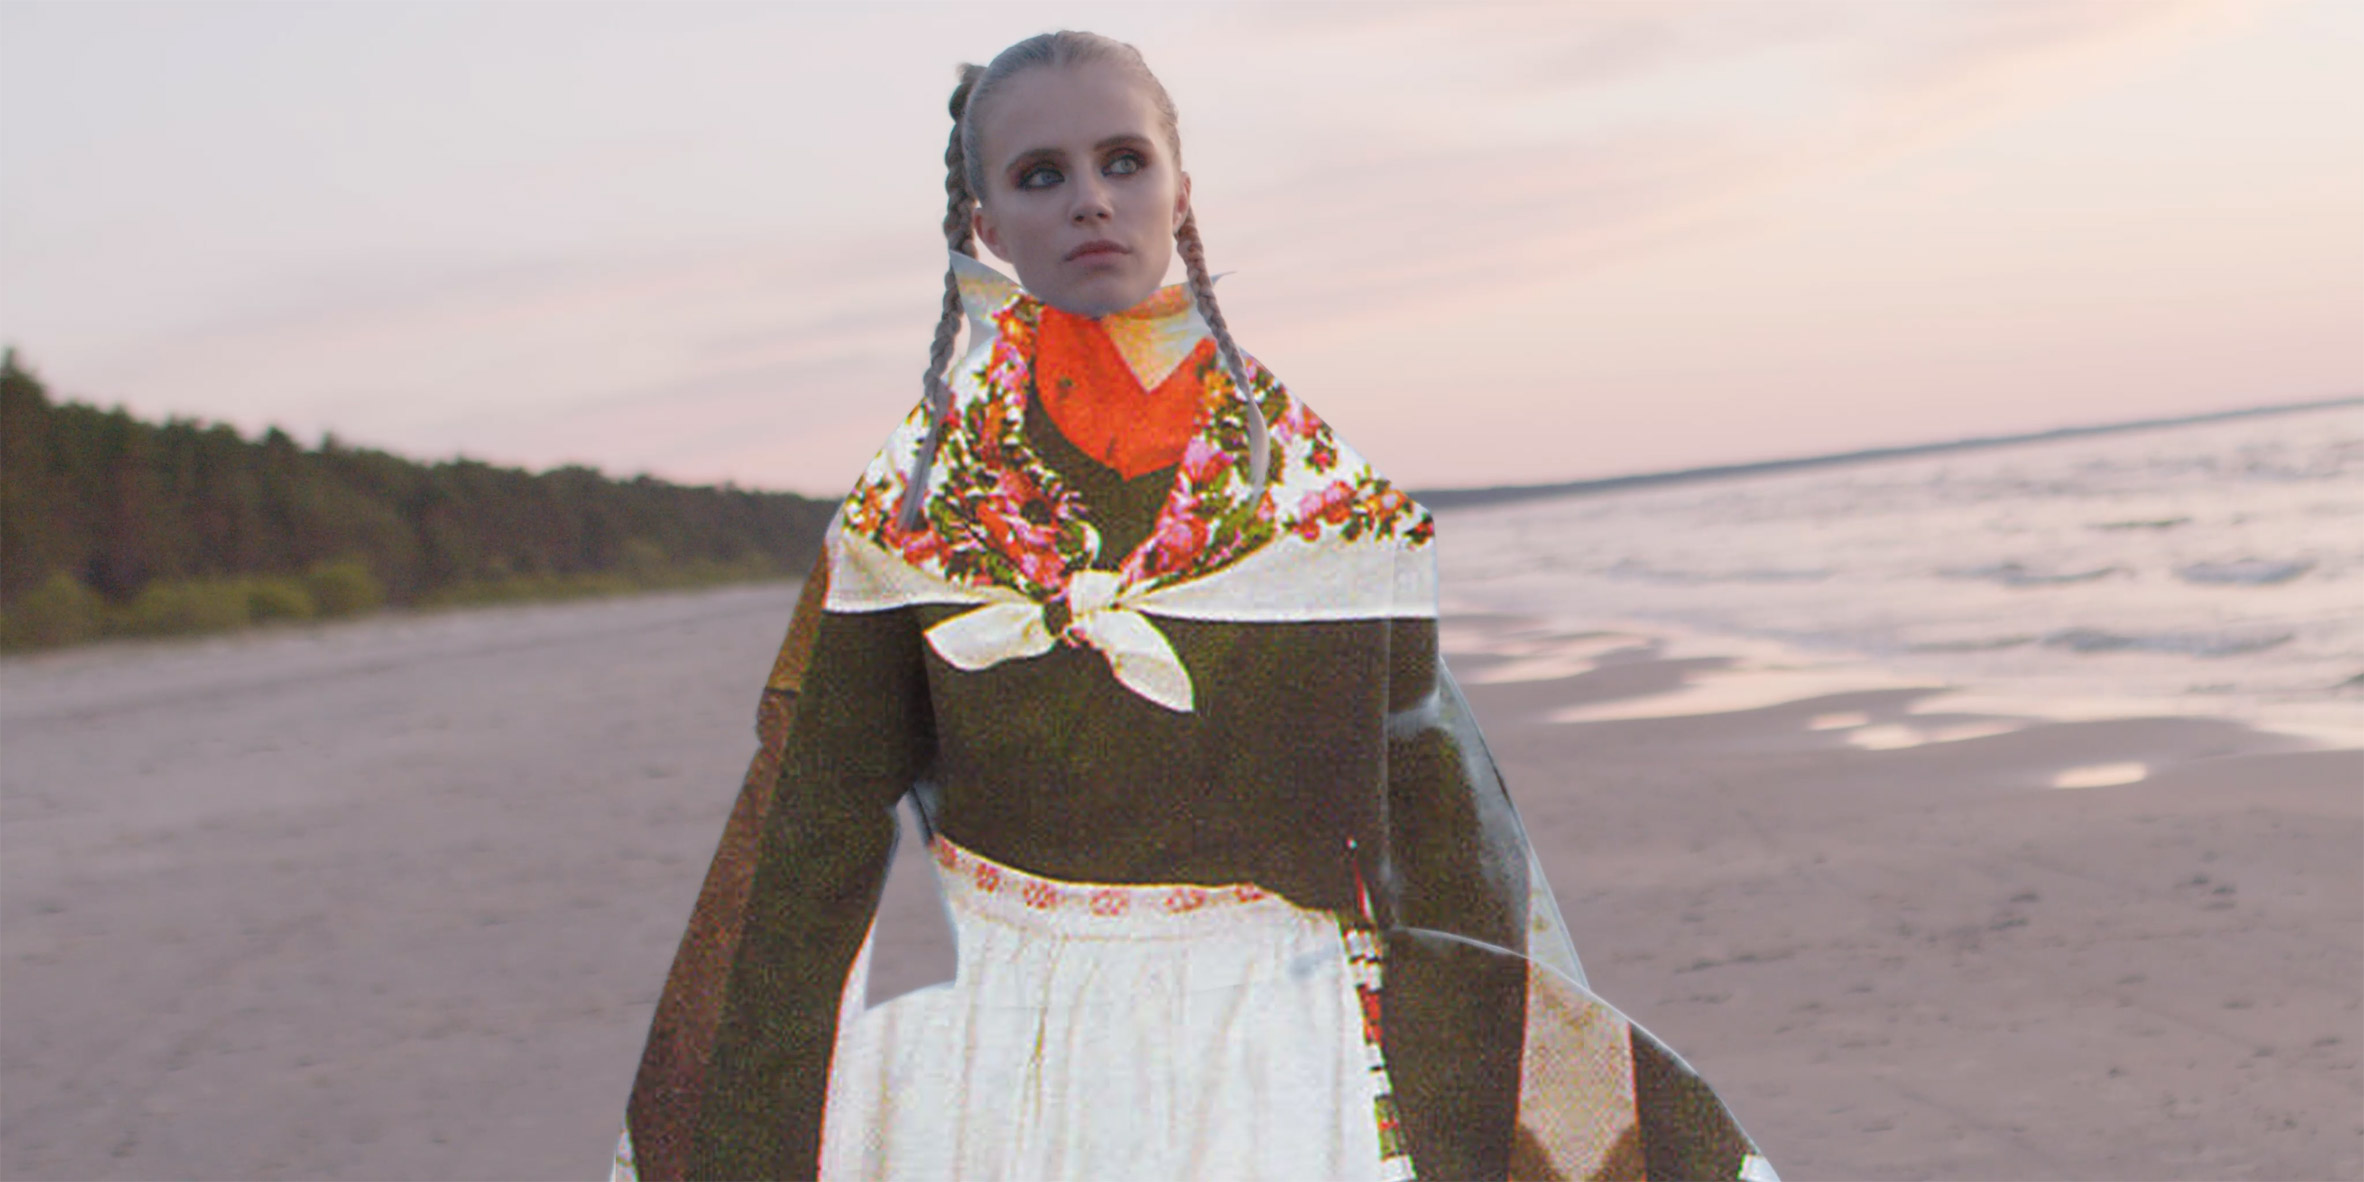 Threads of Influence digital dress featuring traditional Latvian folk outfit image